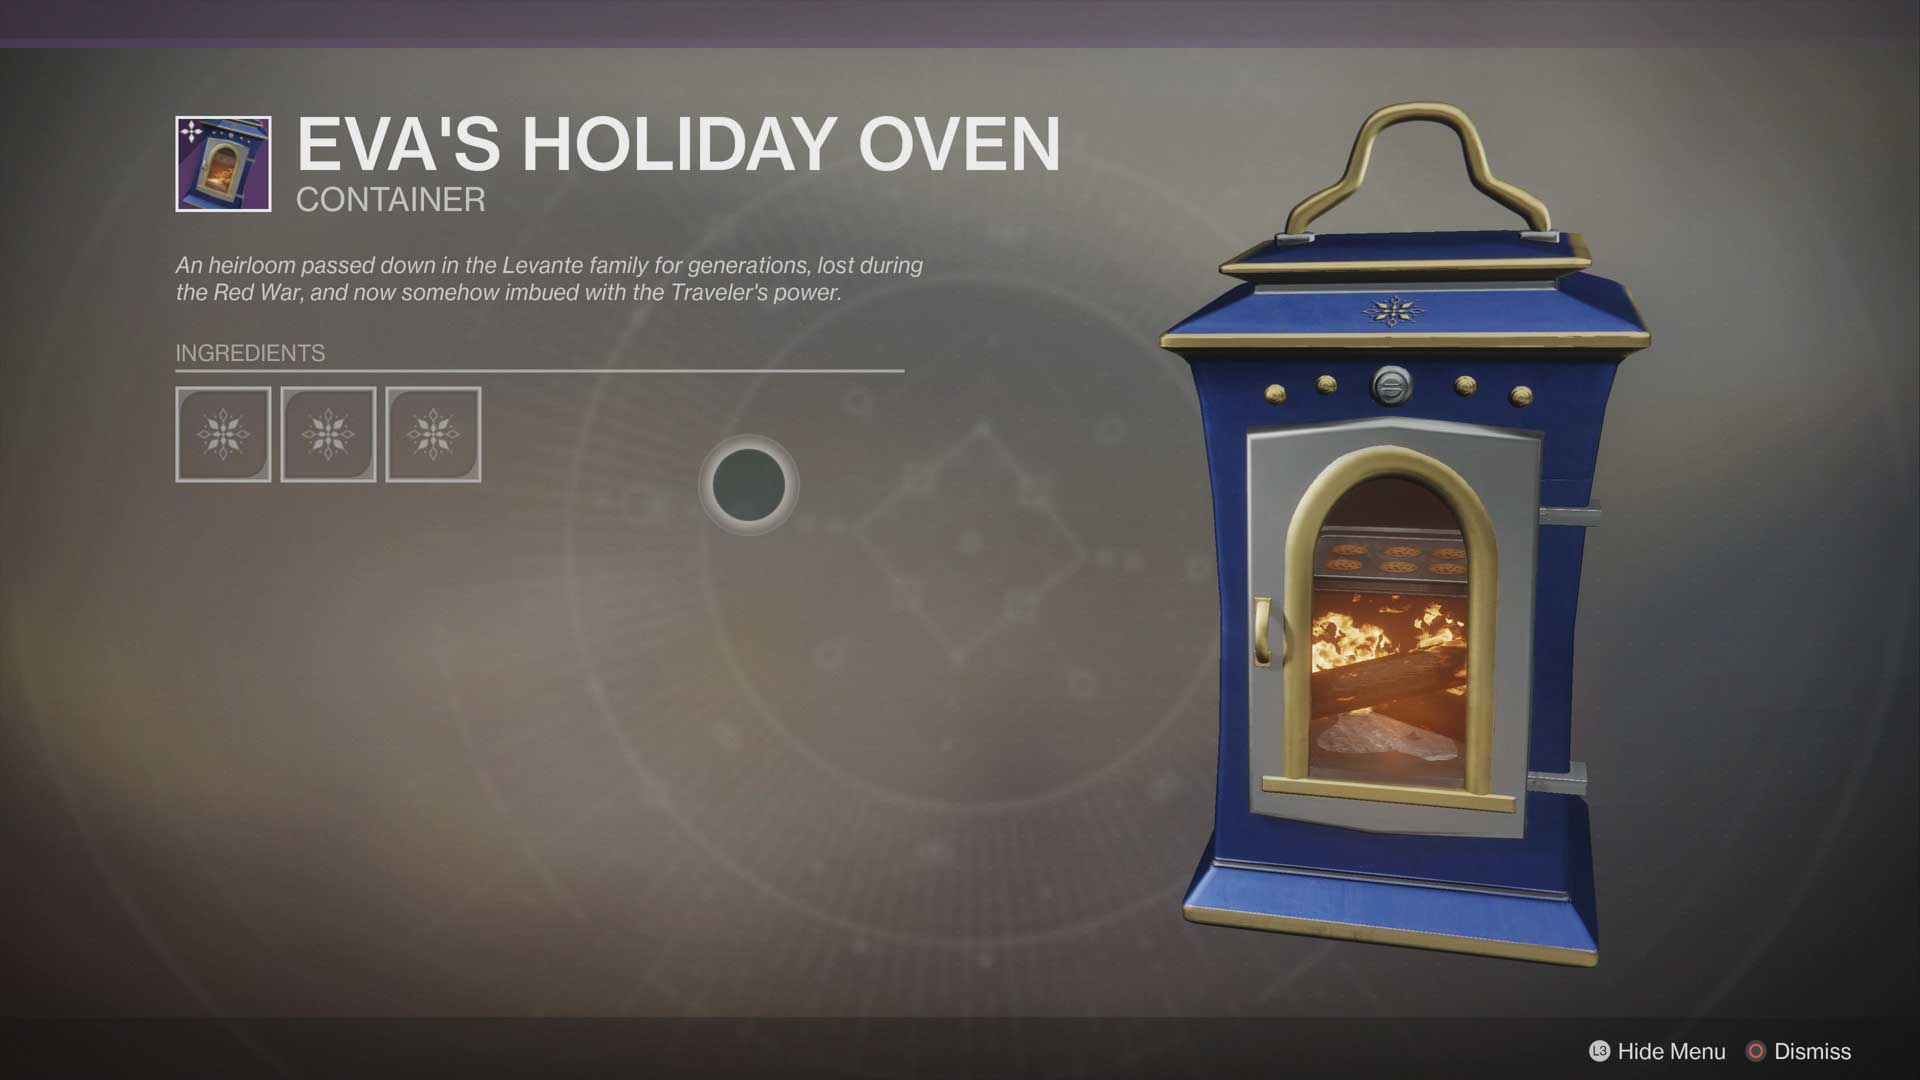 holiday-oven-ingredients-destiny-2-dawning-1280x720.